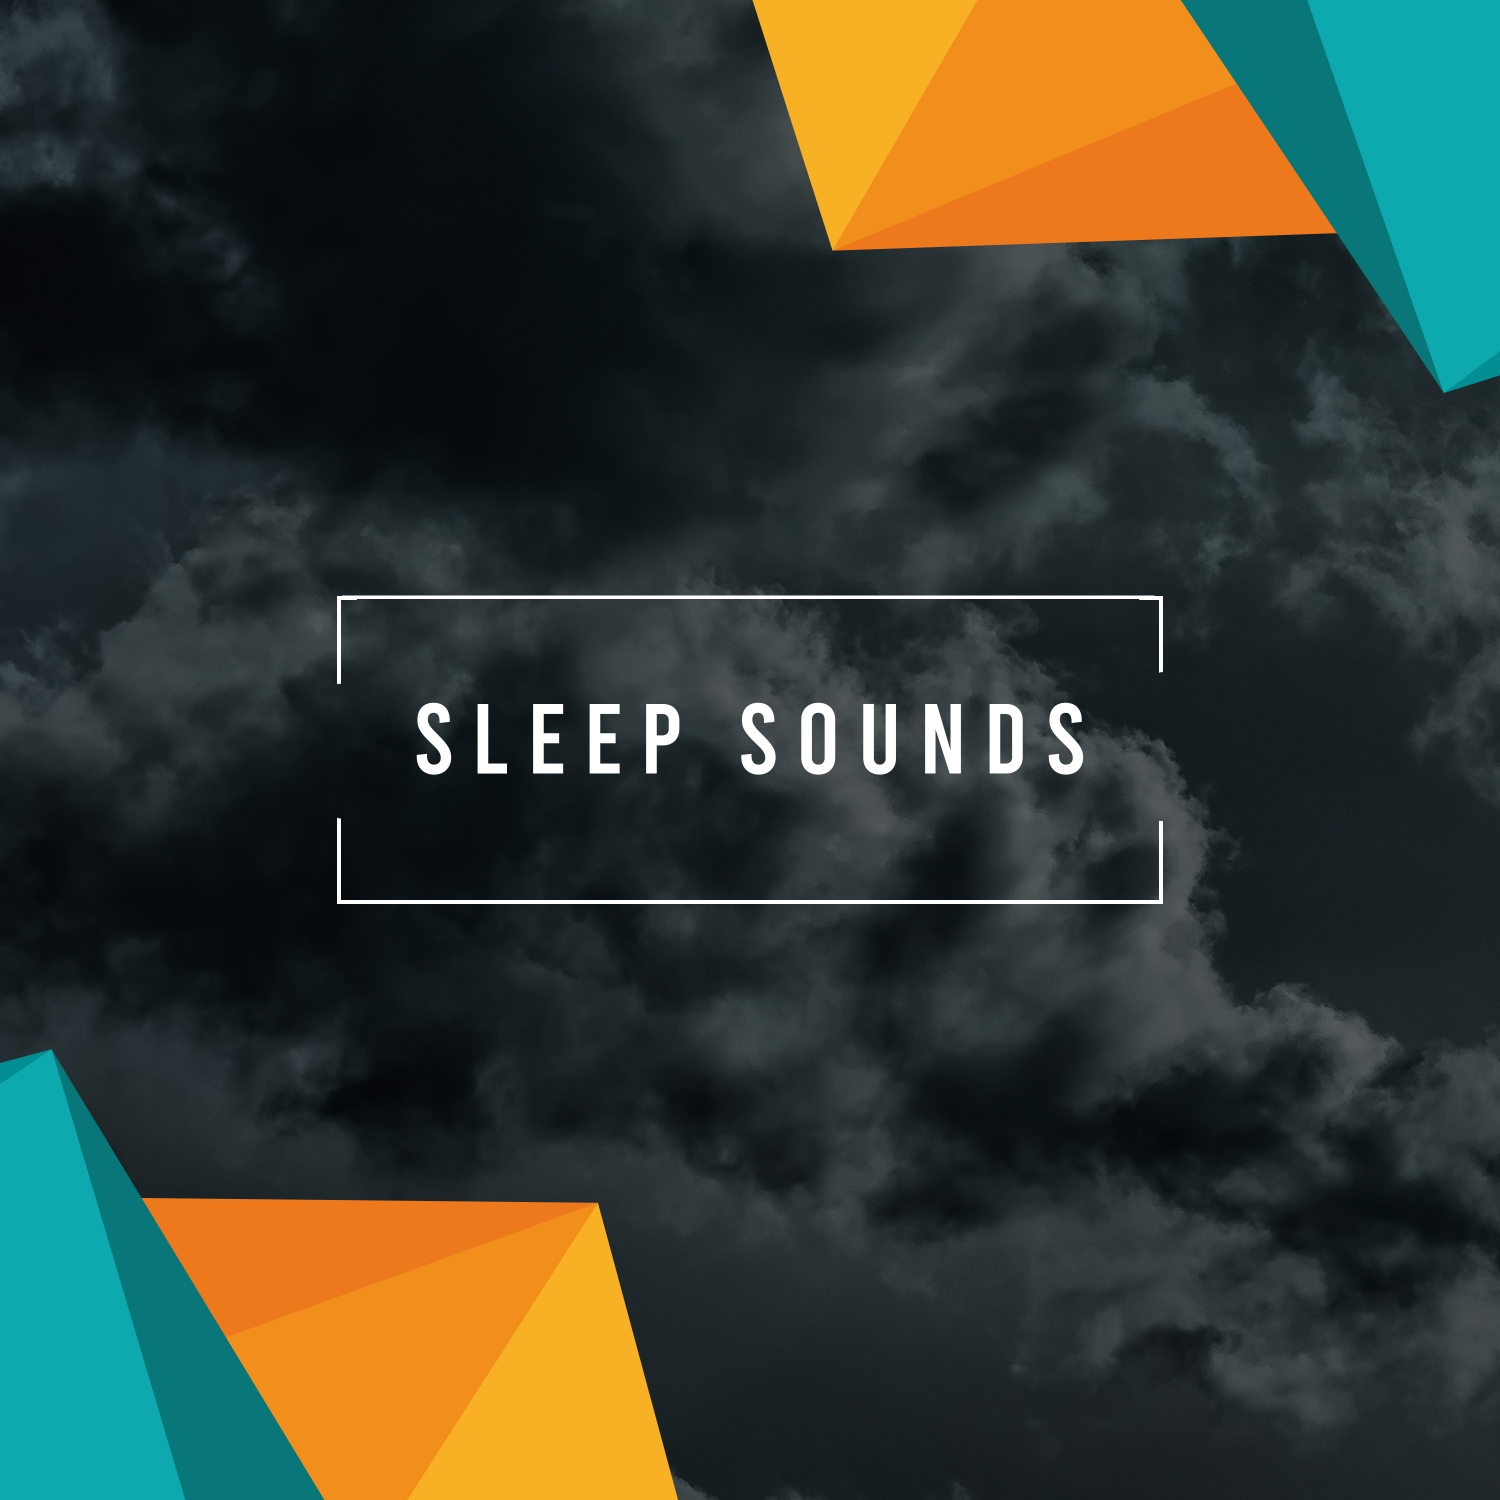 18 Sleep Sounds of Nature - Natural and Loopable